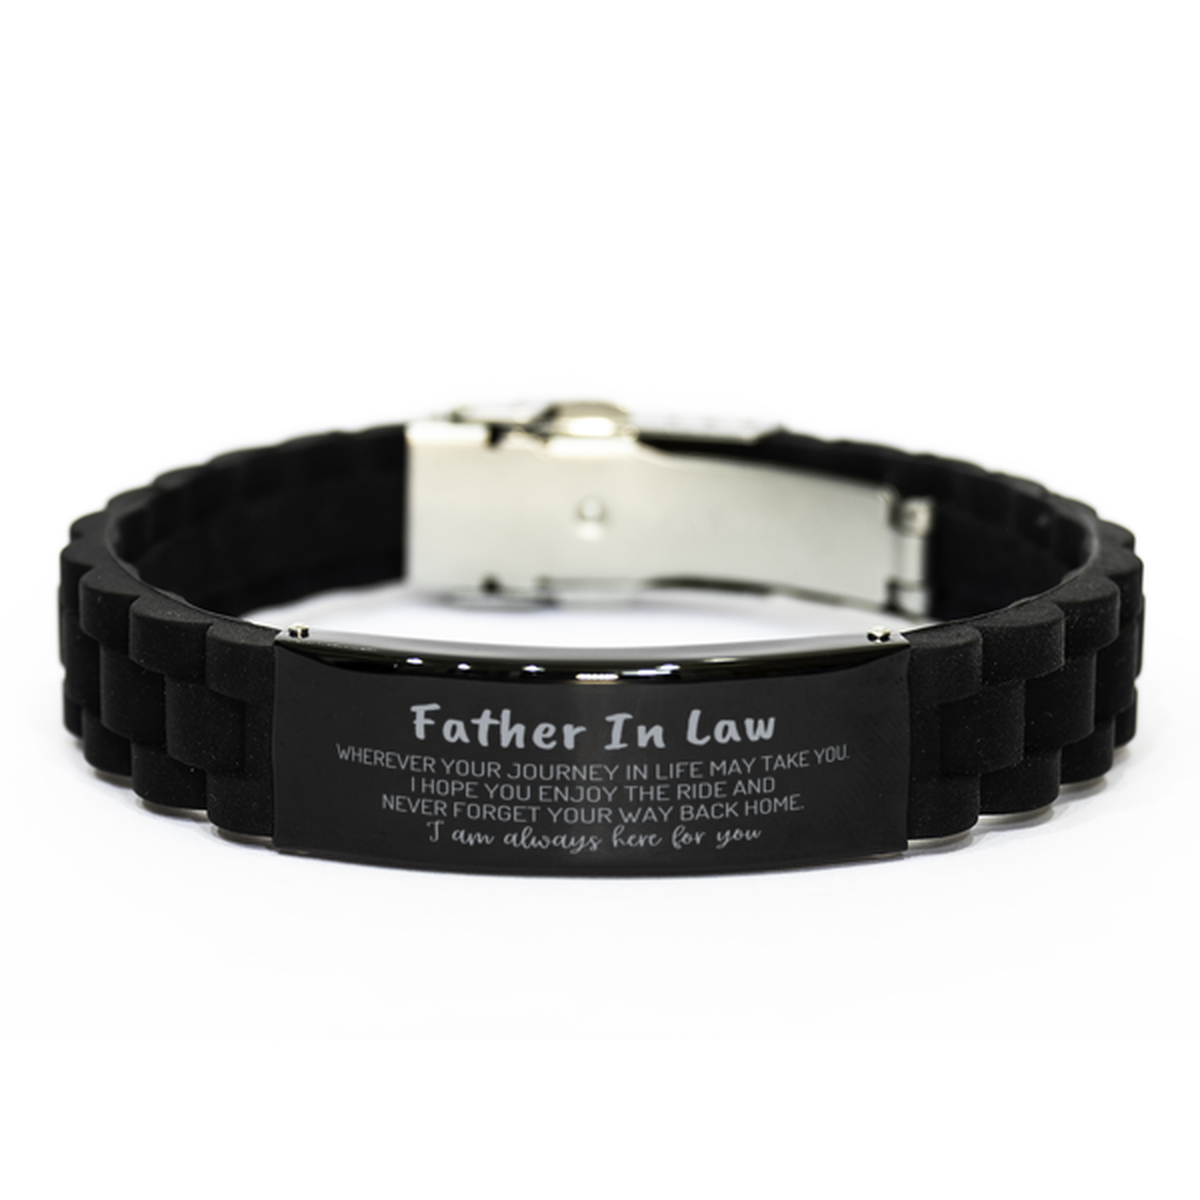 Father In Law wherever your journey in life may take you, I am always here for you Father In Law Black Glidelock Clasp Bracelet, Awesome Christmas Gifts For Father In Law, Father In Law Birthday Gifts for Men Women Family Loved One